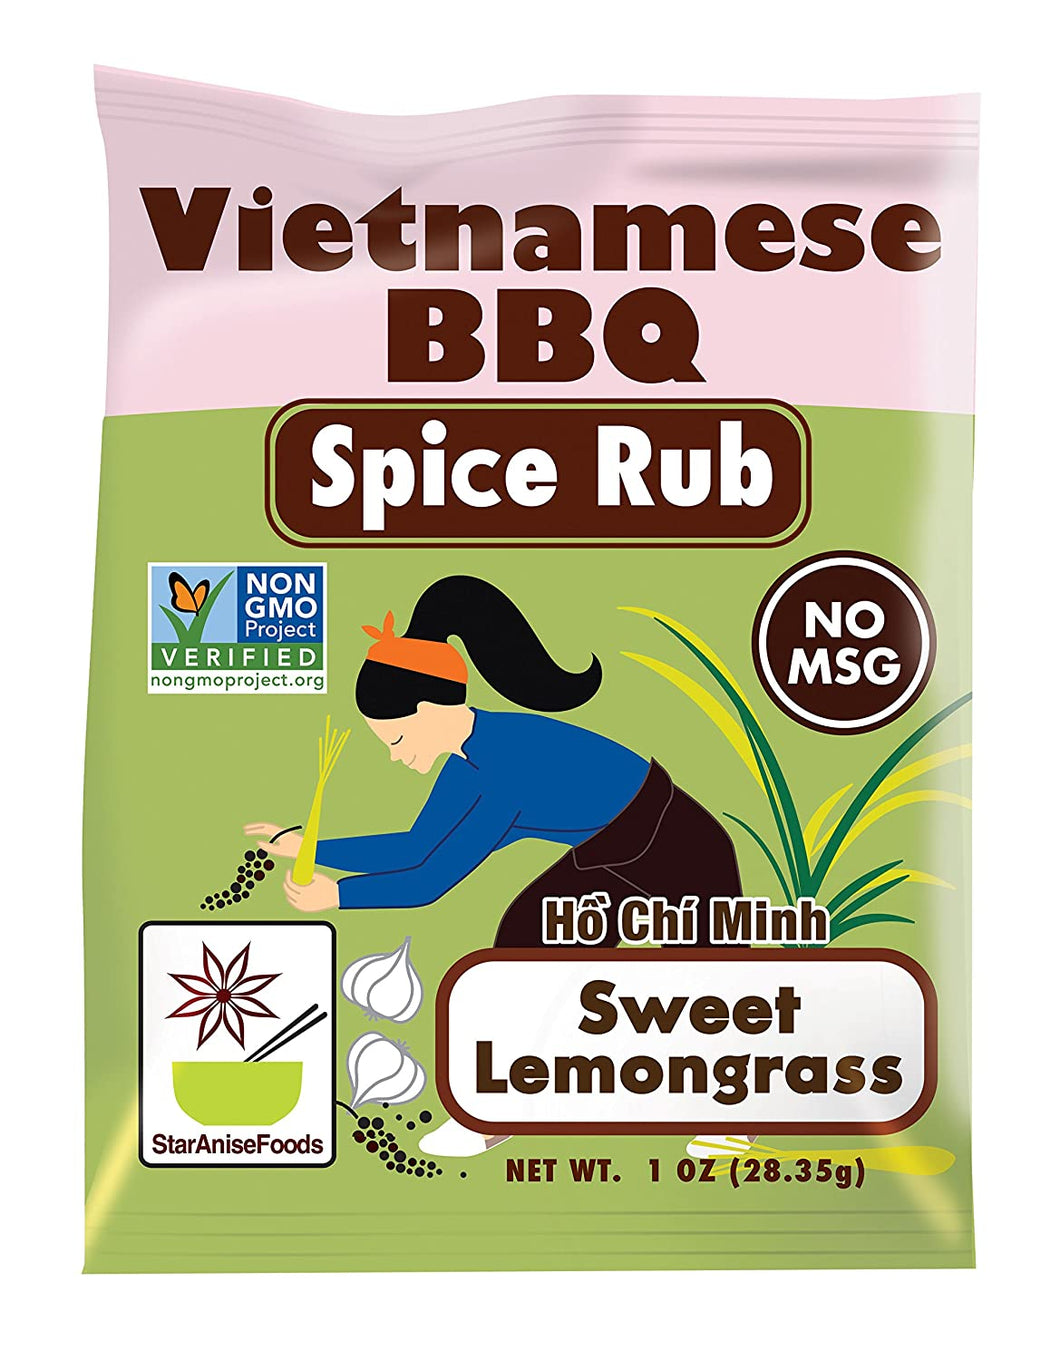 Star Anise Foods - Vietnamese BBQ Sweet Lemongrass Spice Rub Contains No MSG and Gluten Free - (Pack of 10 packets of 1 oz each)